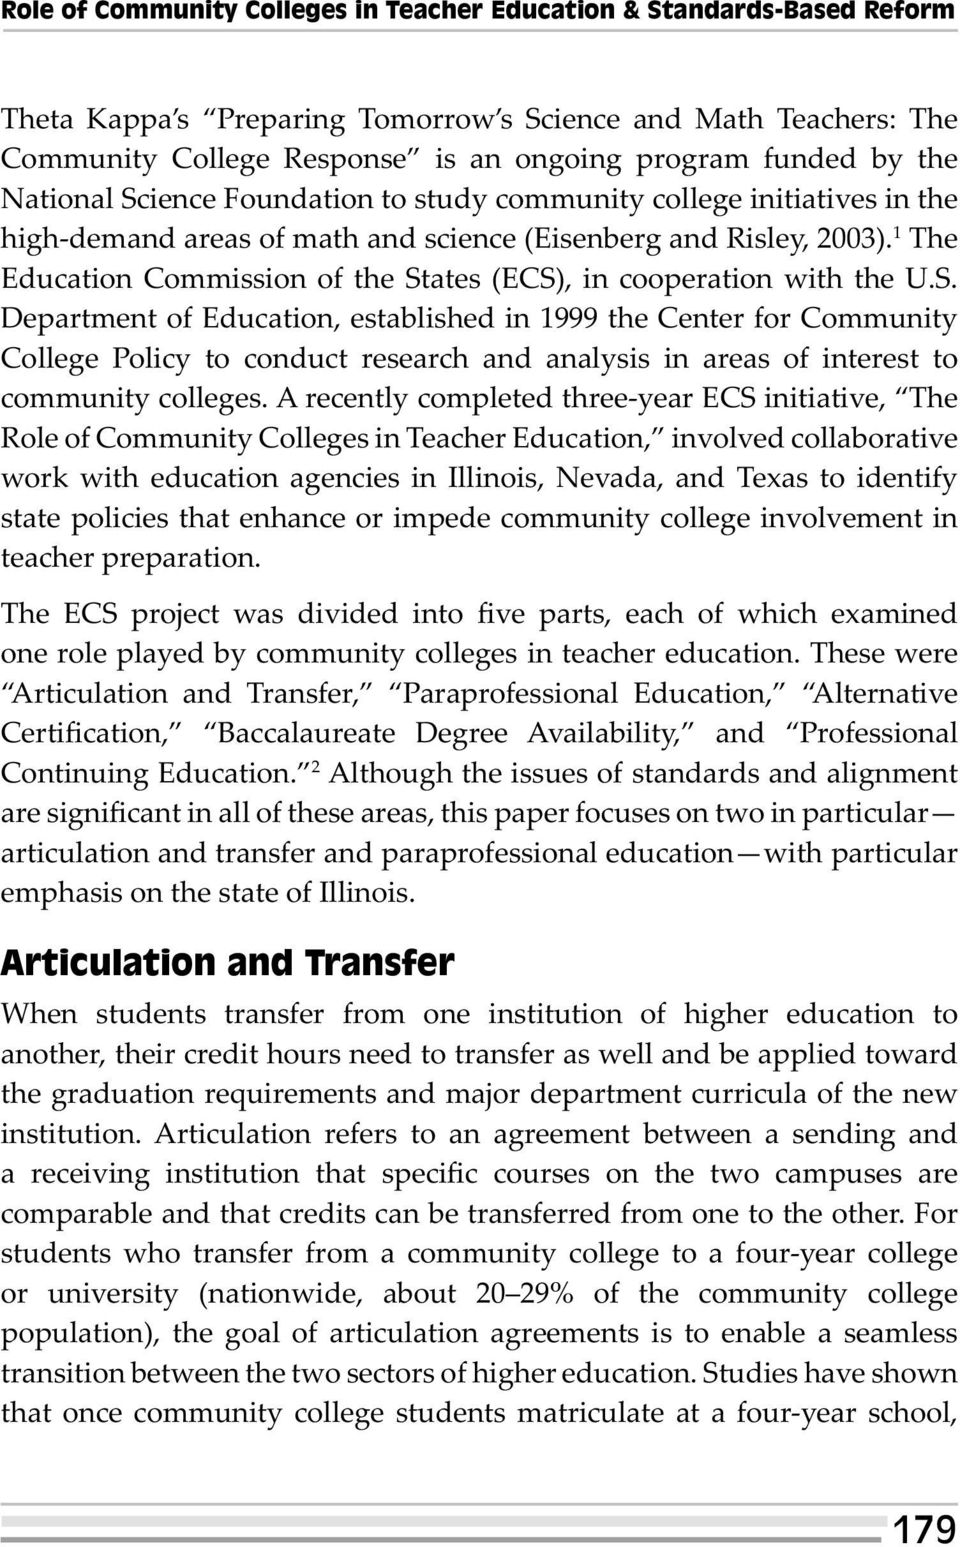 1 The Education Commission of the States (ECS), in cooperation with the U.S. Department of Education, established in 1999 the Center for Community College Policy to conduct research and analysis in areas of interest to community colleges.